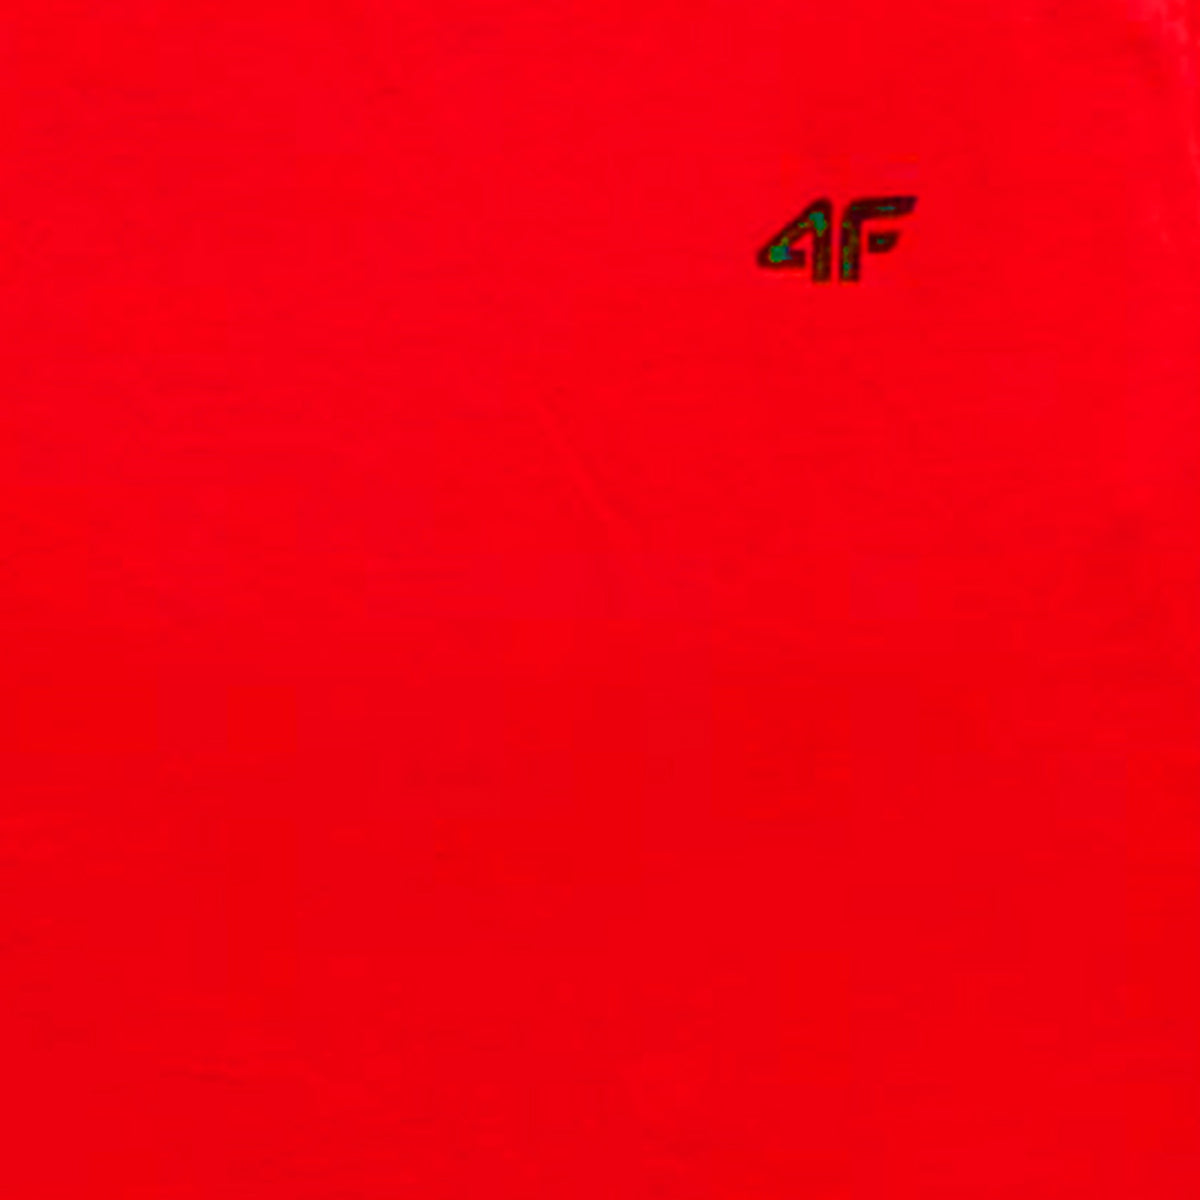 Classic Red Boys T-Shirt with Subtle 4F Branding